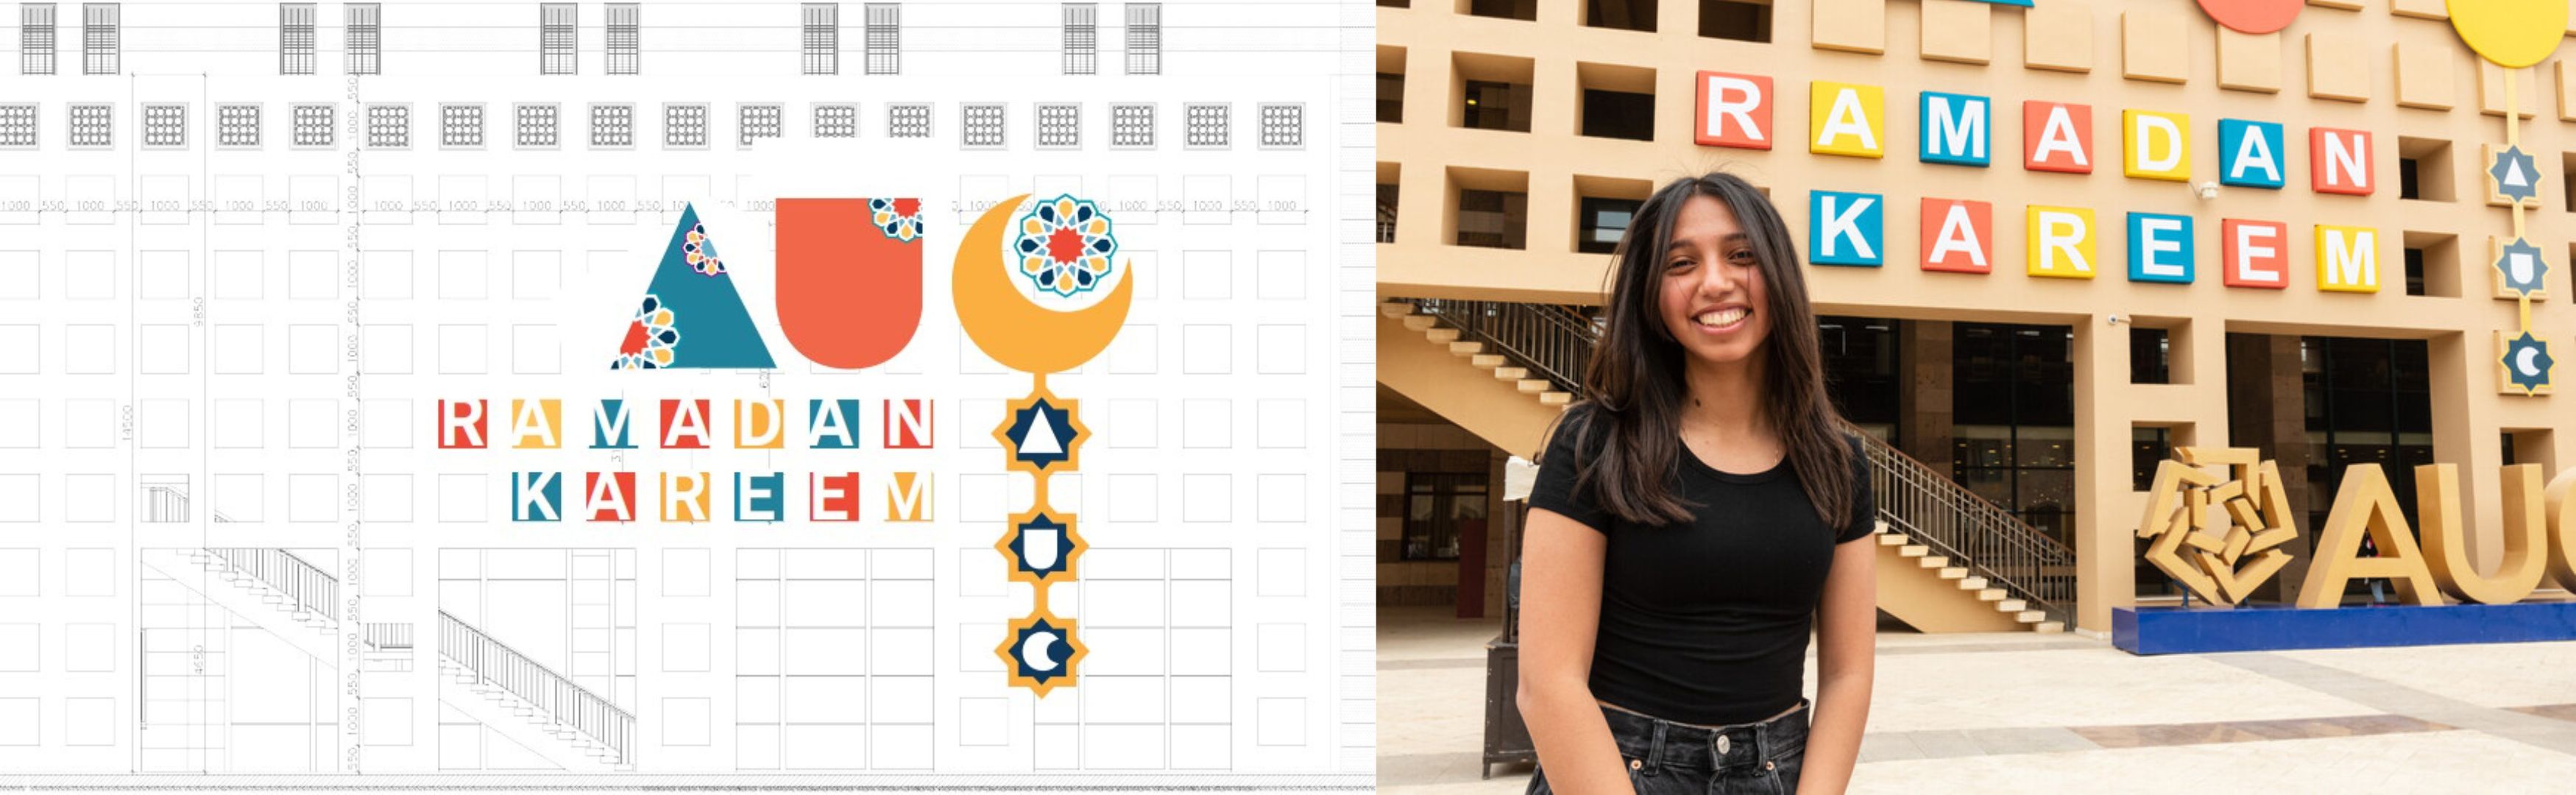 Nadine Ibrahim stands and smiles in front of the library facade design. The design features the words "Ramadan Kareem" written in white font with AUC's logo colors of orange, blue and yellow as background. The AUC logo sits above the words with geometric designs and the "C" is a yellow crescent. To the left is a photo of the original design she submitted with similar elements.